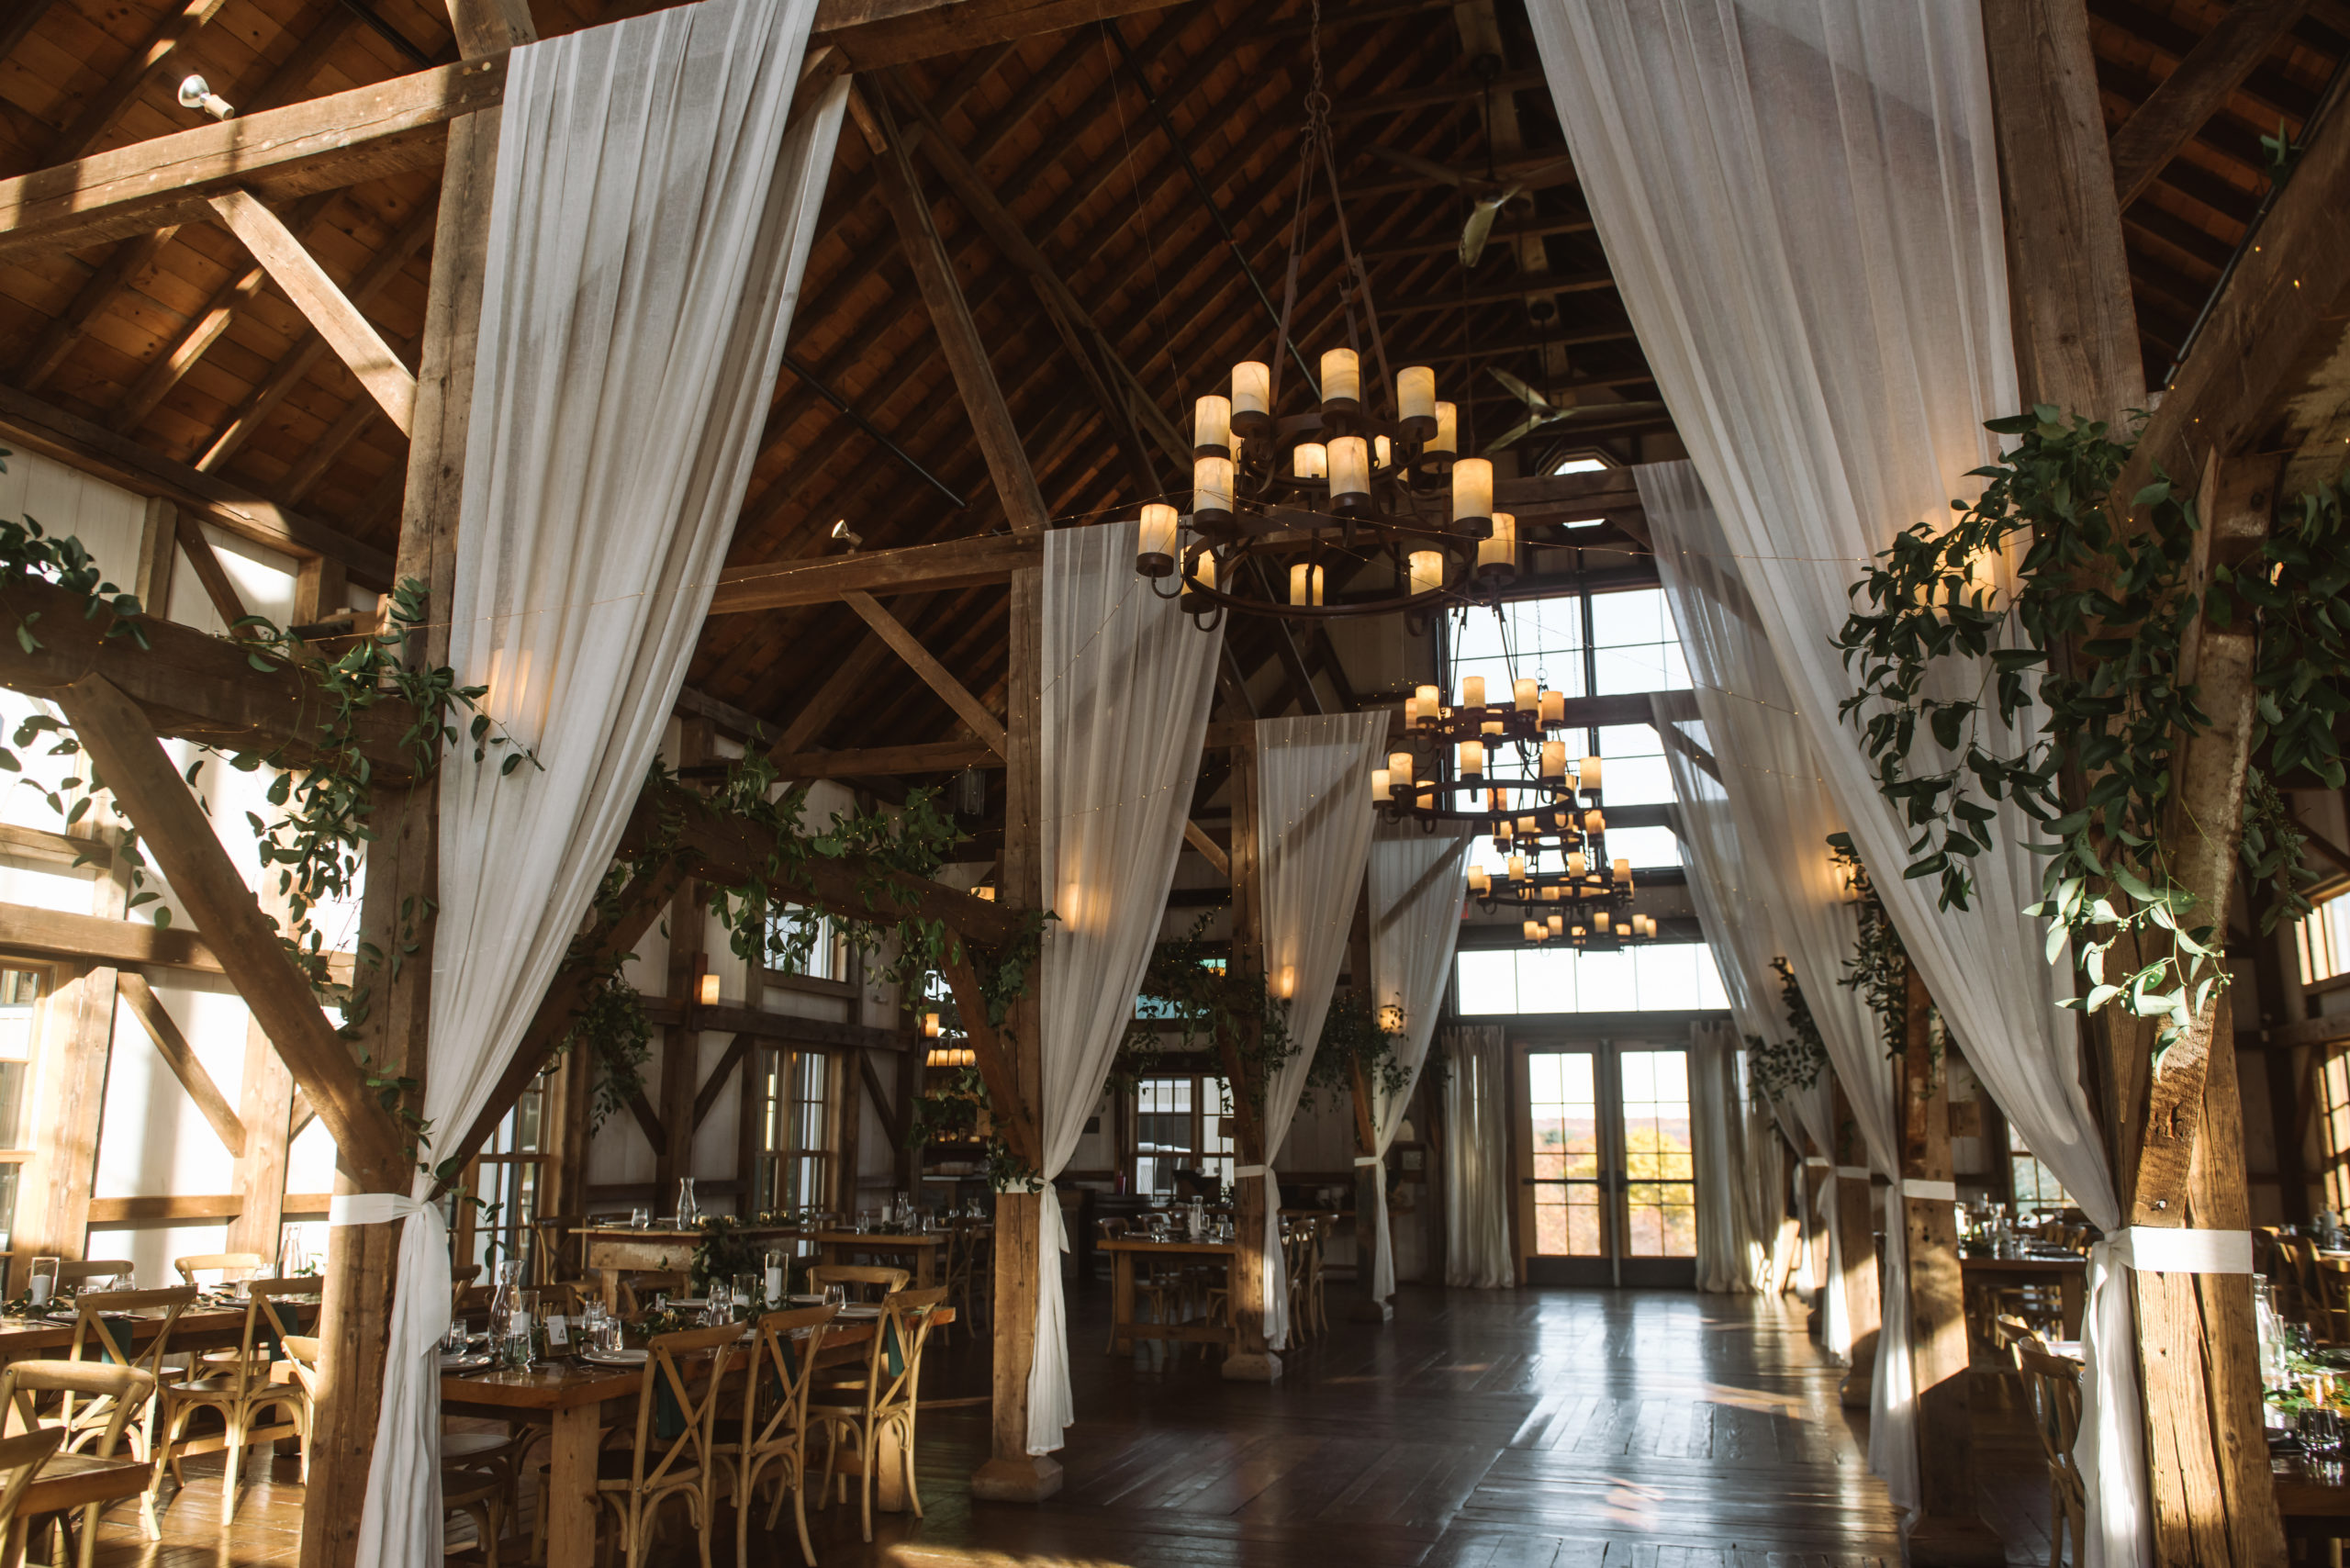 Renovated barn reception venue featuring multiple wooden tables and chairs. There are hanging wide candle-like chandeliers that are lit. Sheer white curtains decorate the wooden beams alongside greenery.